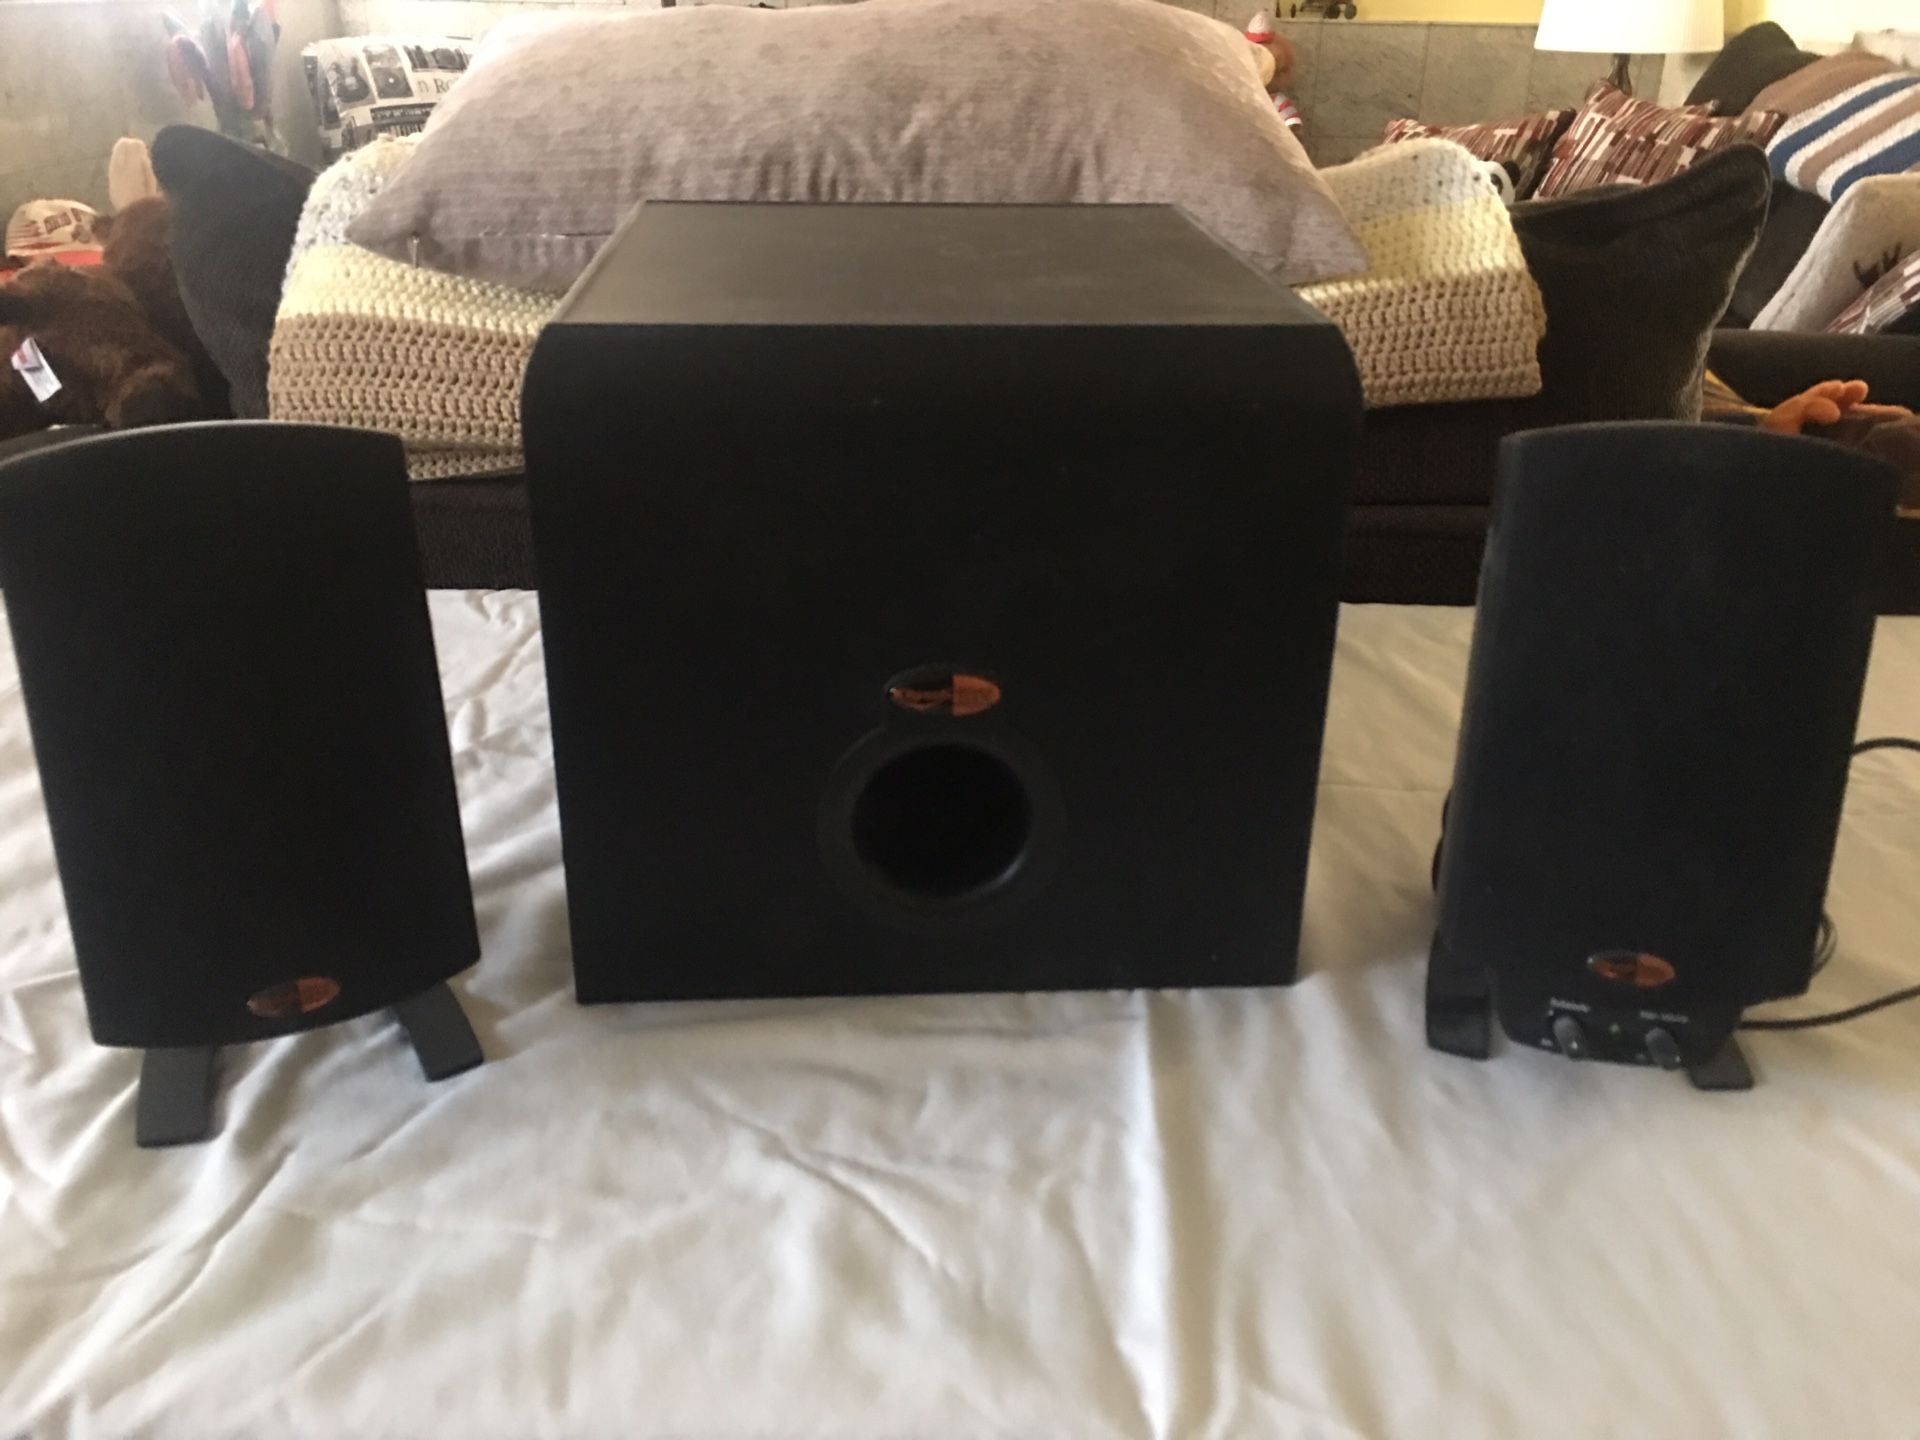 Computer speakers and bass unit.